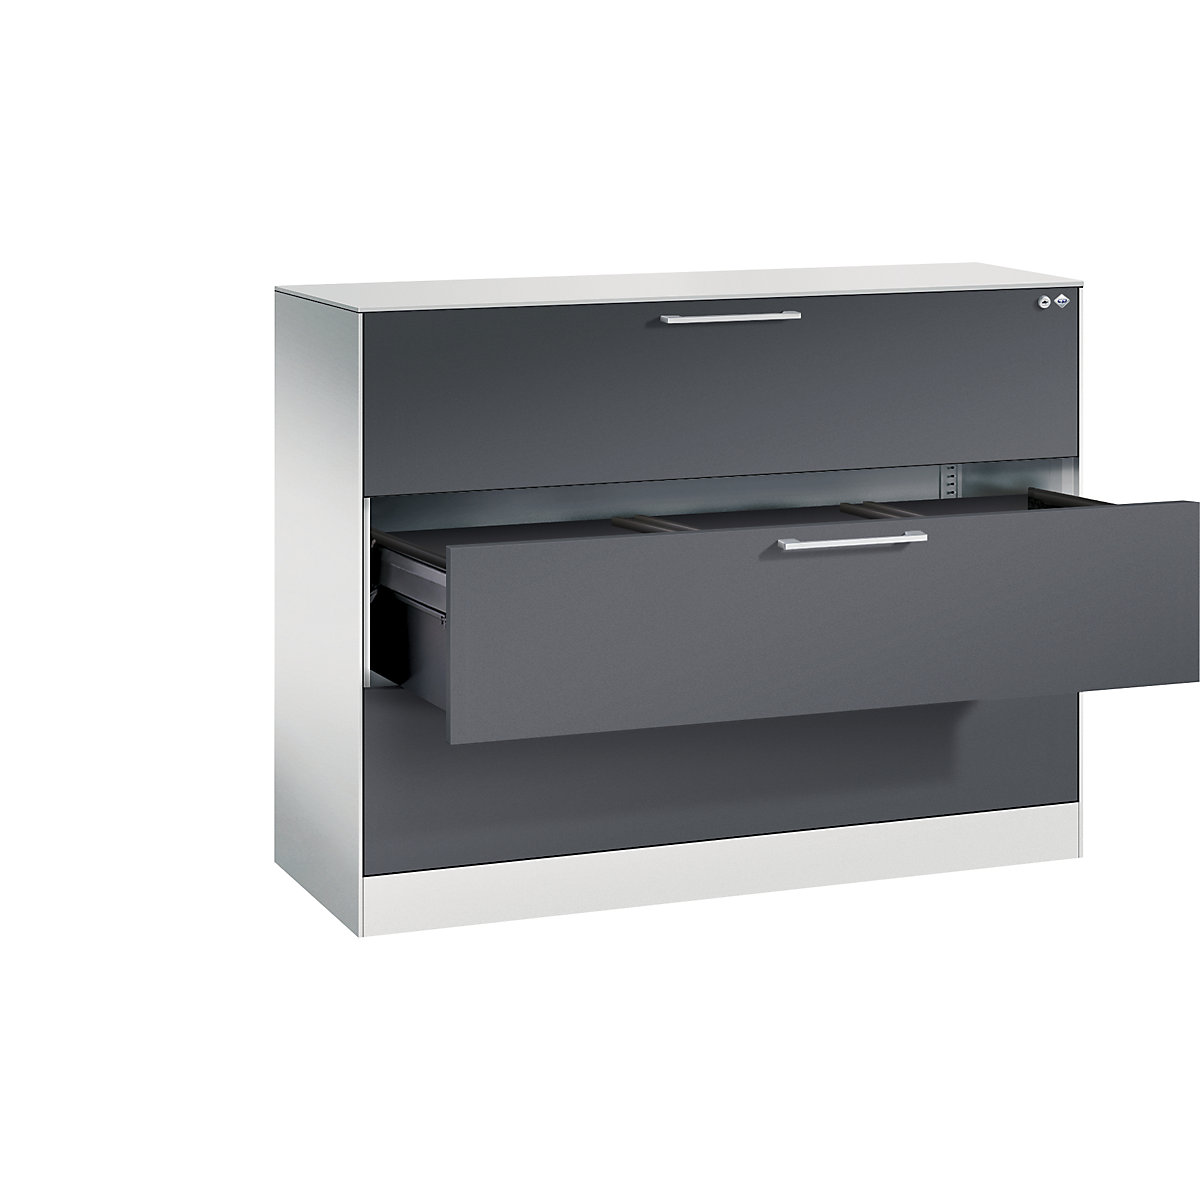 ASISTO suspension filing cabinet – C+P, width 1200 mm, with 3 drawers, light grey/black grey-3